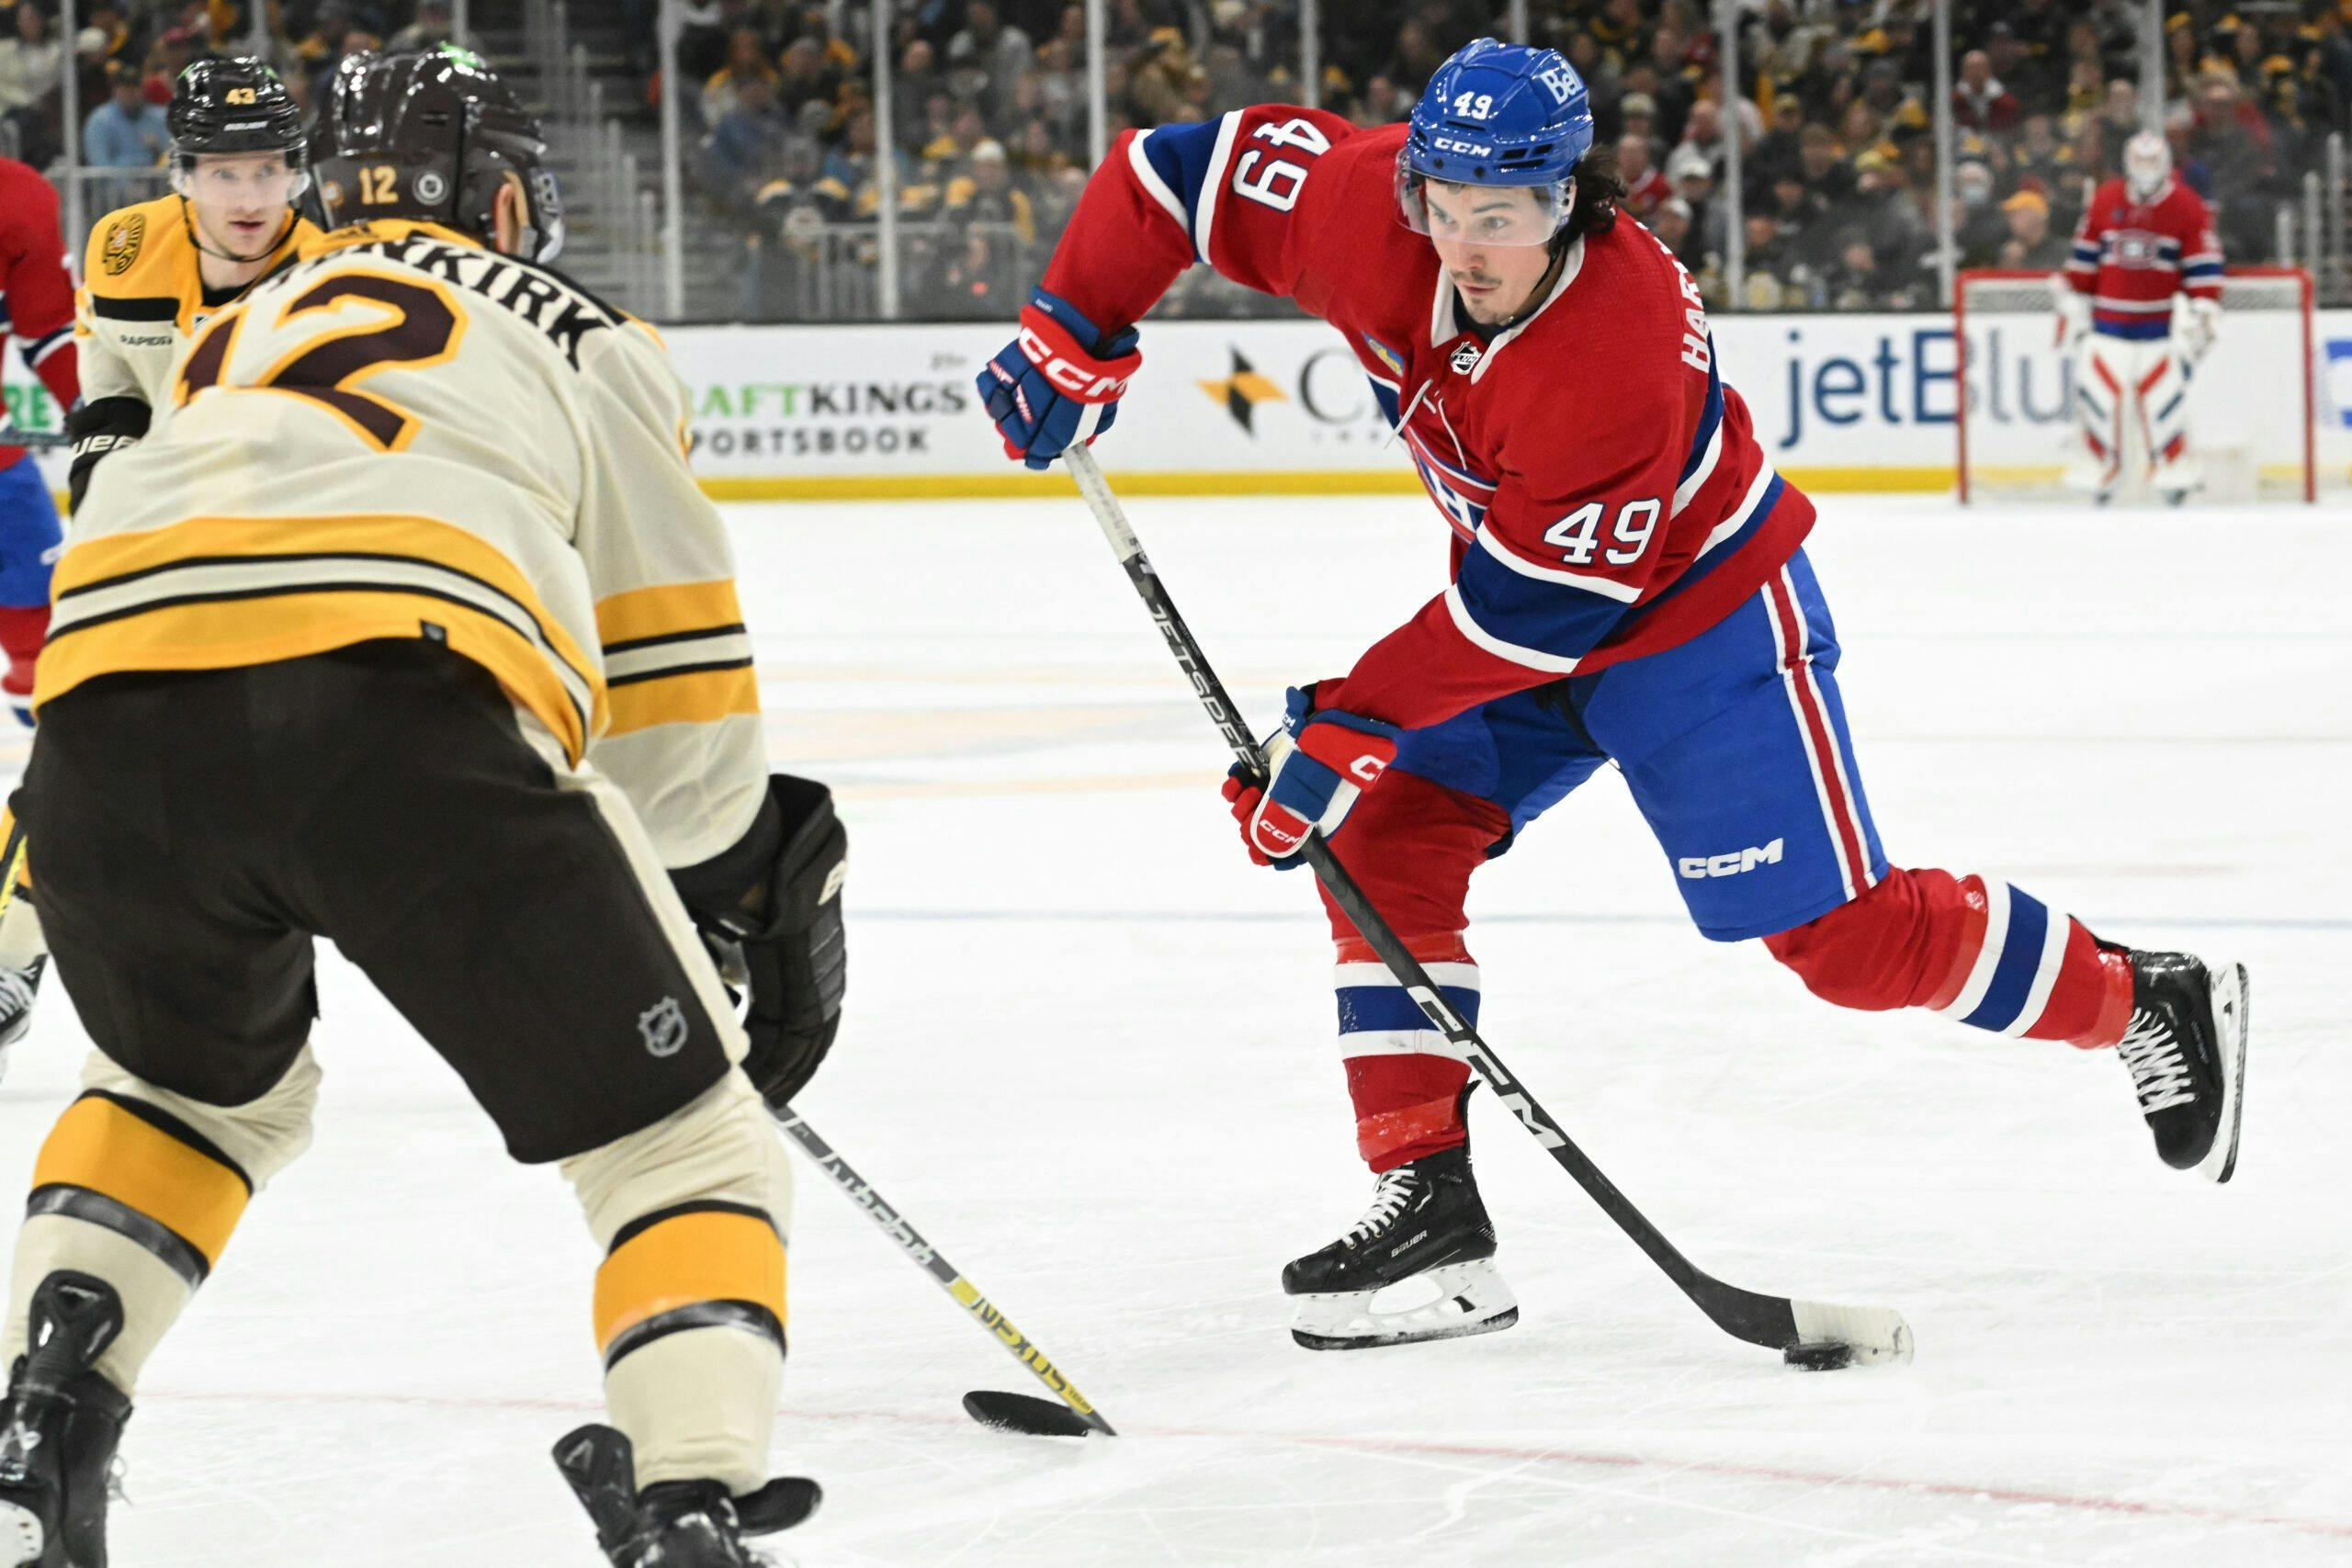 Montreal Canadiens’ forward Rafael Harvey-Pinard out 4-6 weeks with lower-body injury